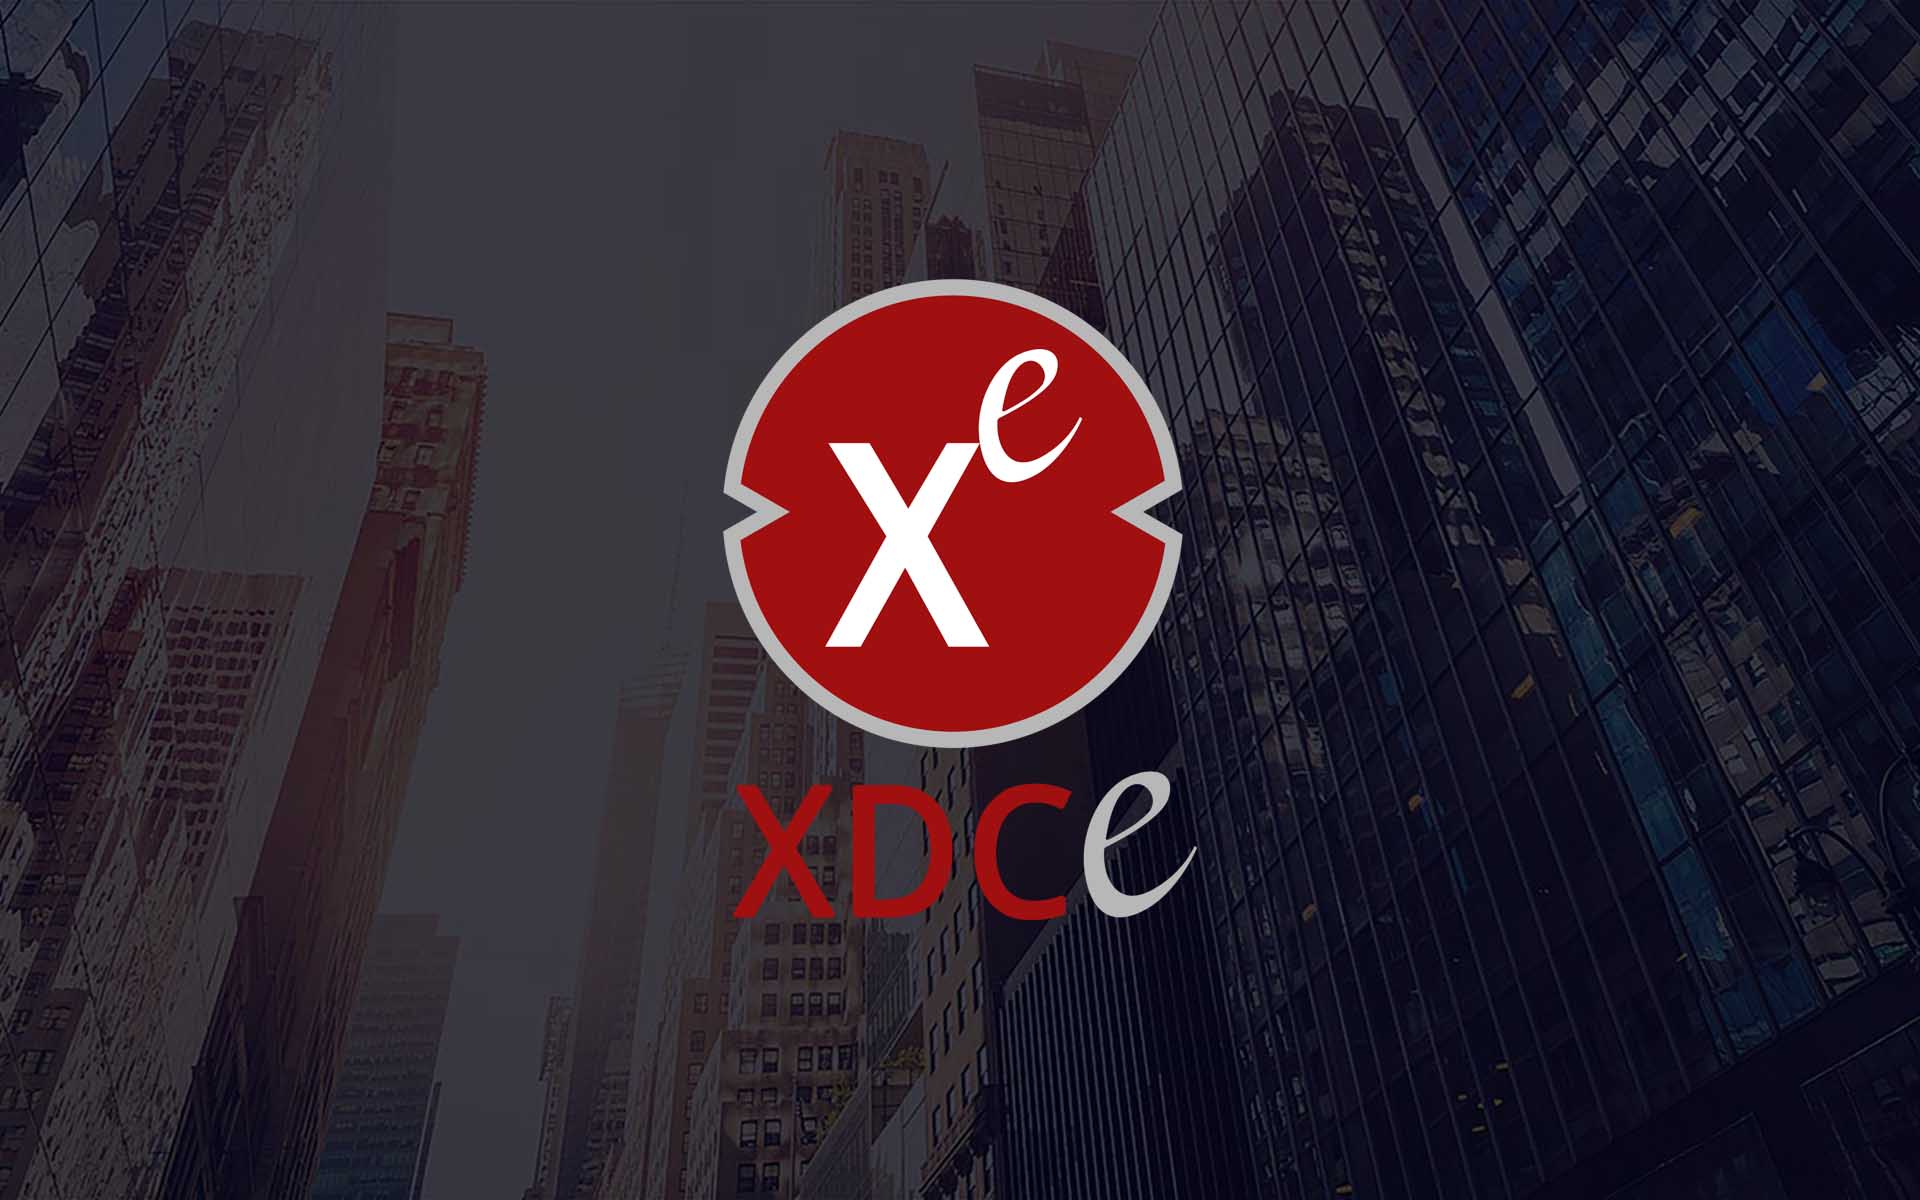 XinFin Ties up with KoinOK.com, Gets Its Utility Token XDCE Listed on One of India’s Top Exchange